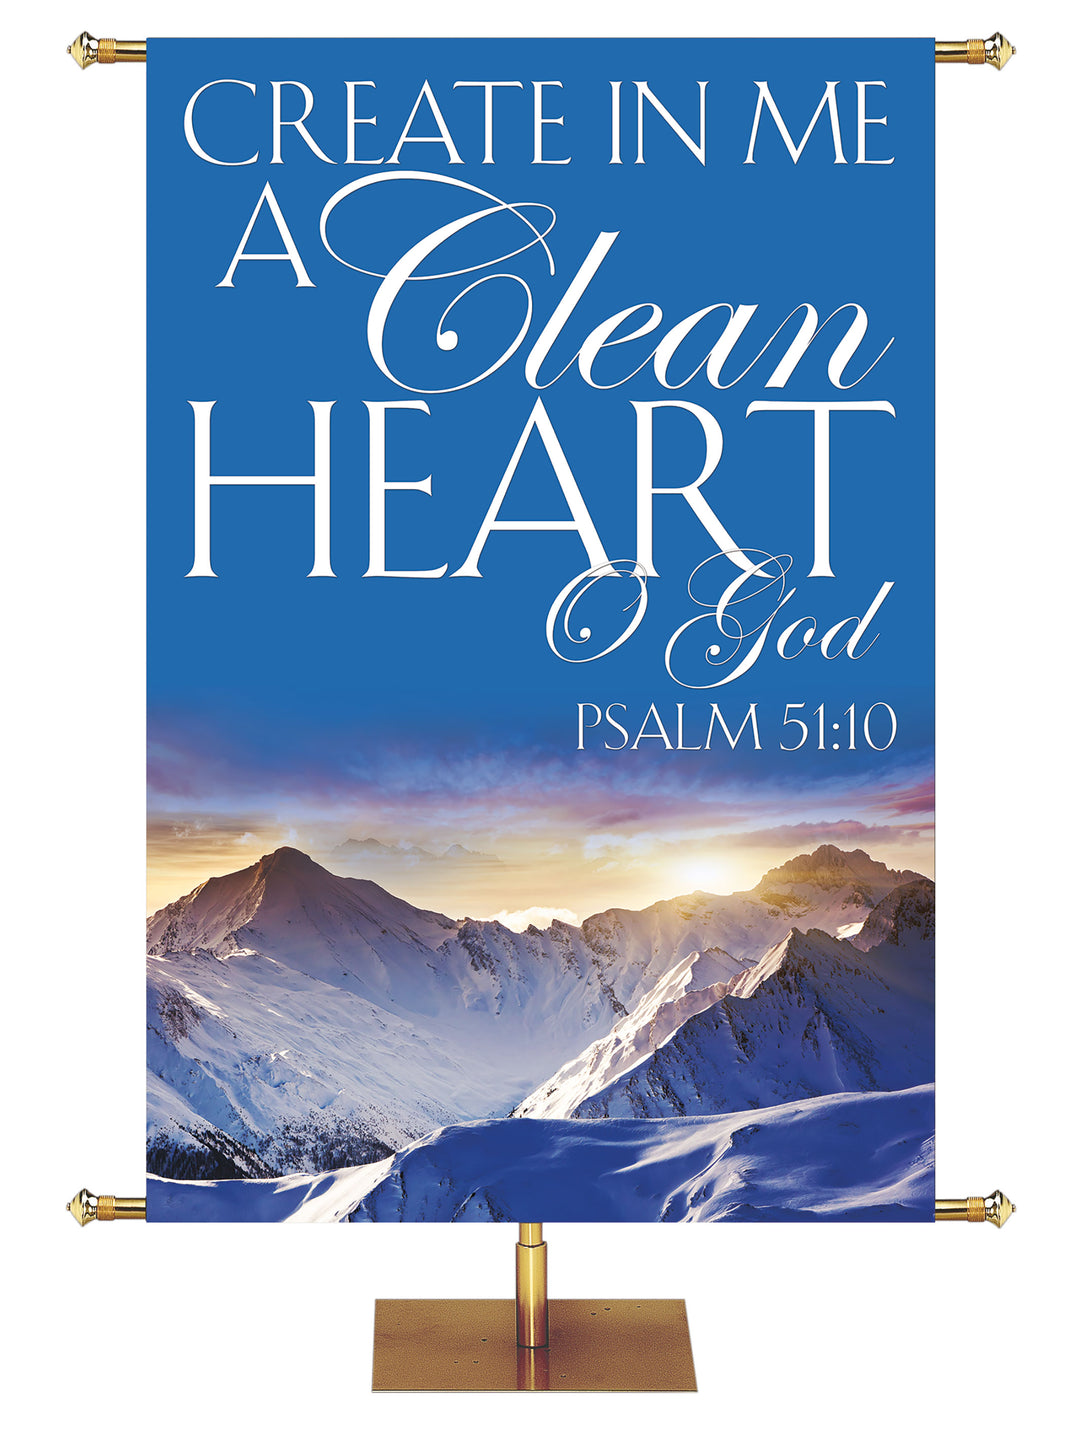 Portraits of Sacred Winter Create In Me a Clean Heart C - Christmas Banners - PraiseBanners